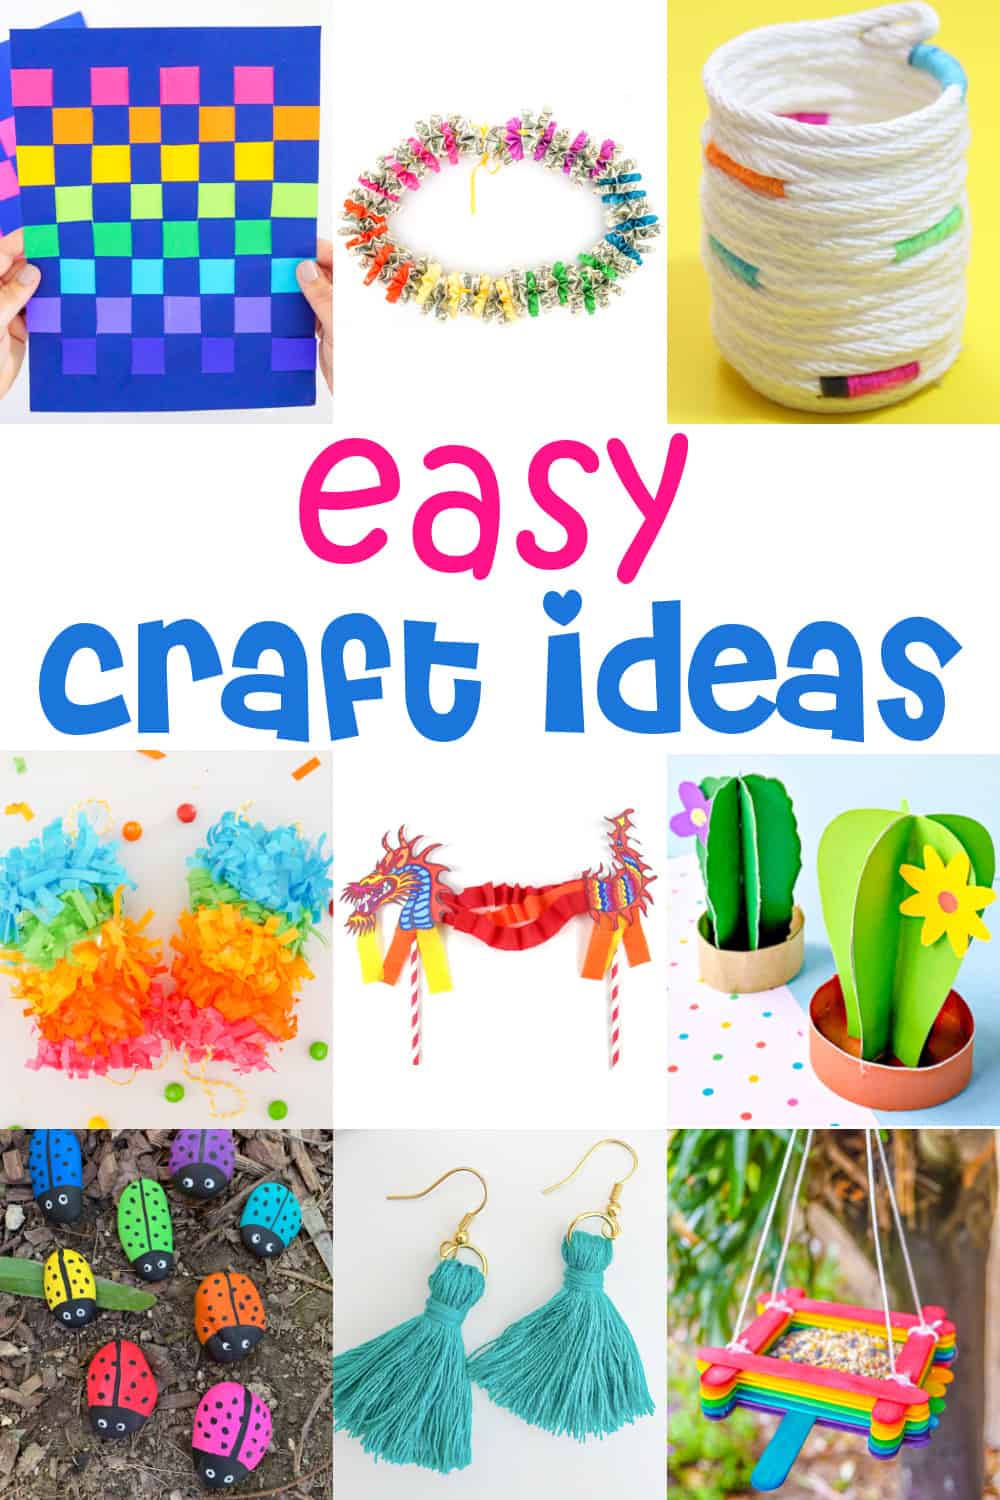 101+ Easy Craft Ideas For Kids - Made with HAPPY